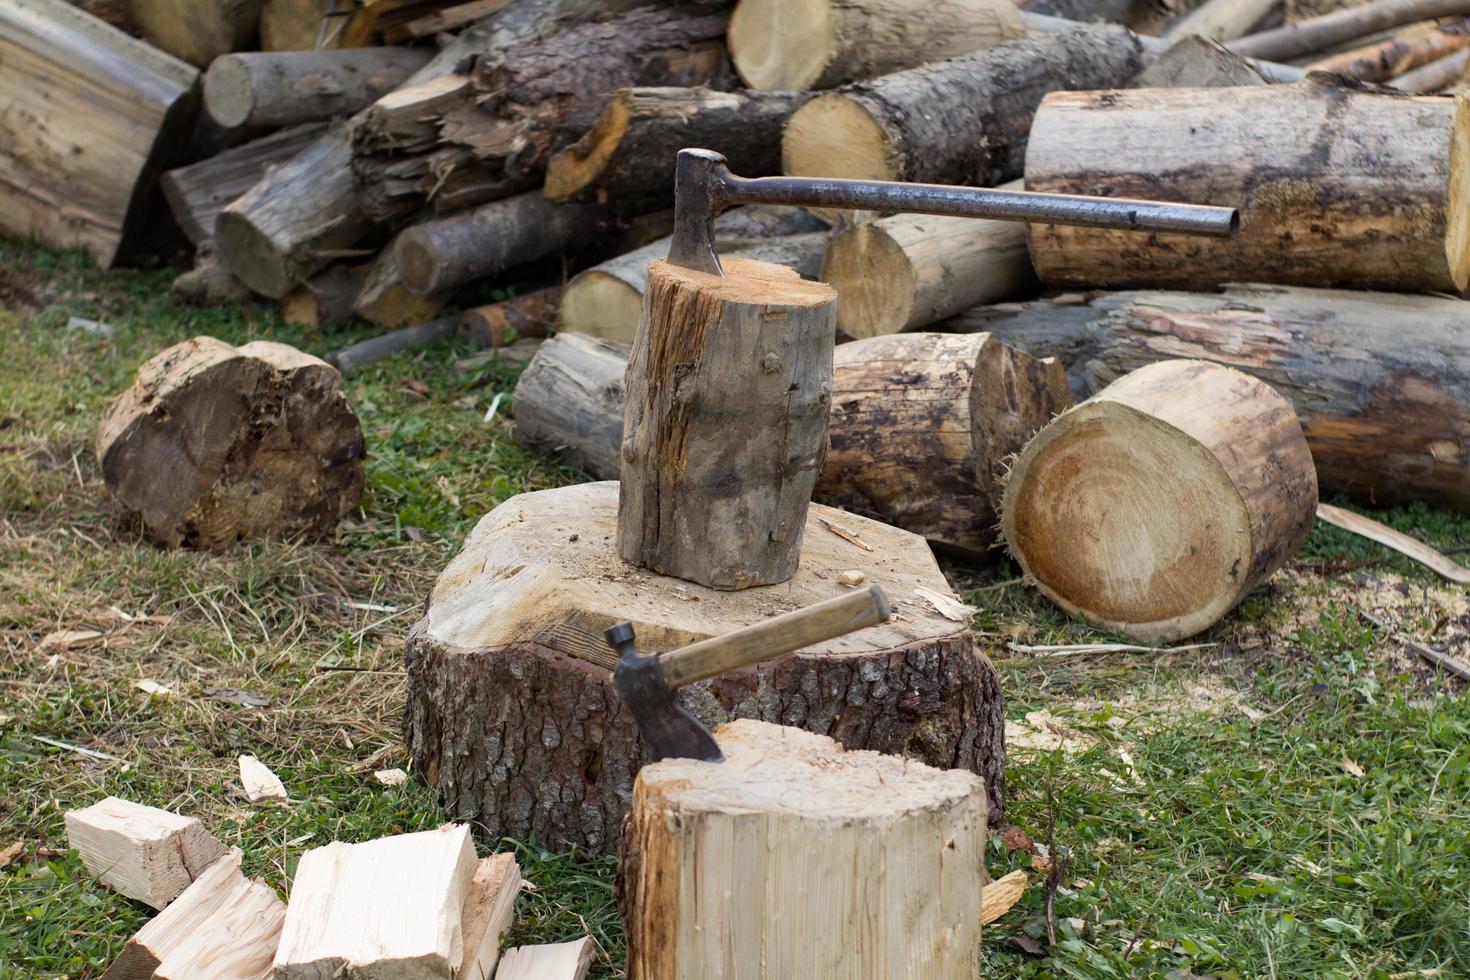 Close up piture of chopping firewood, country photo with wood and axe